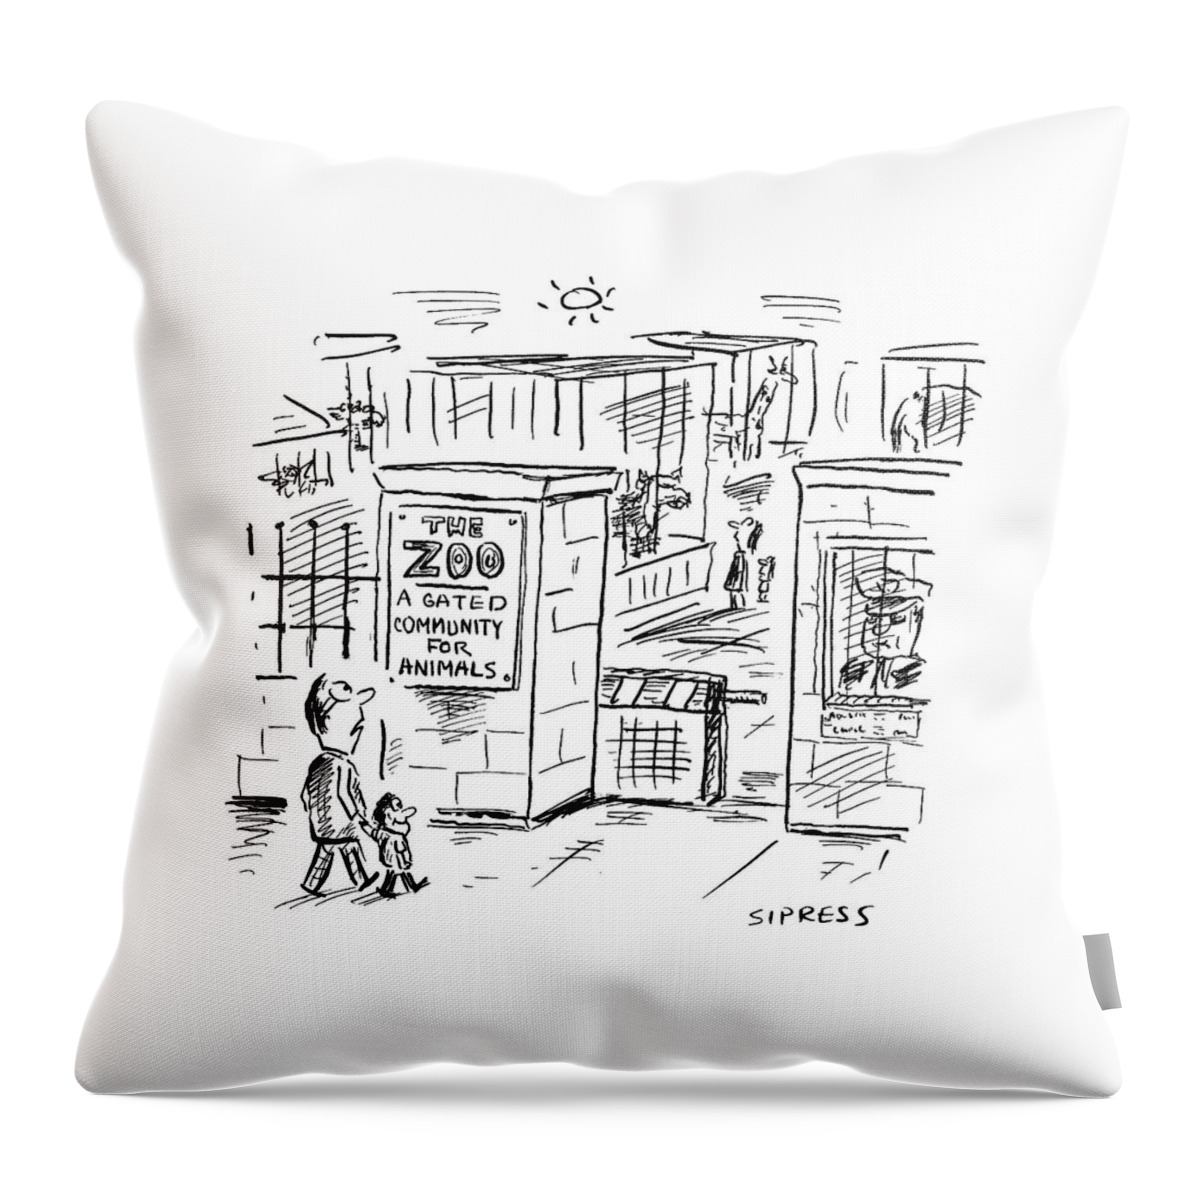 The Zoo
A Gated Community For Animals Throw Pillow